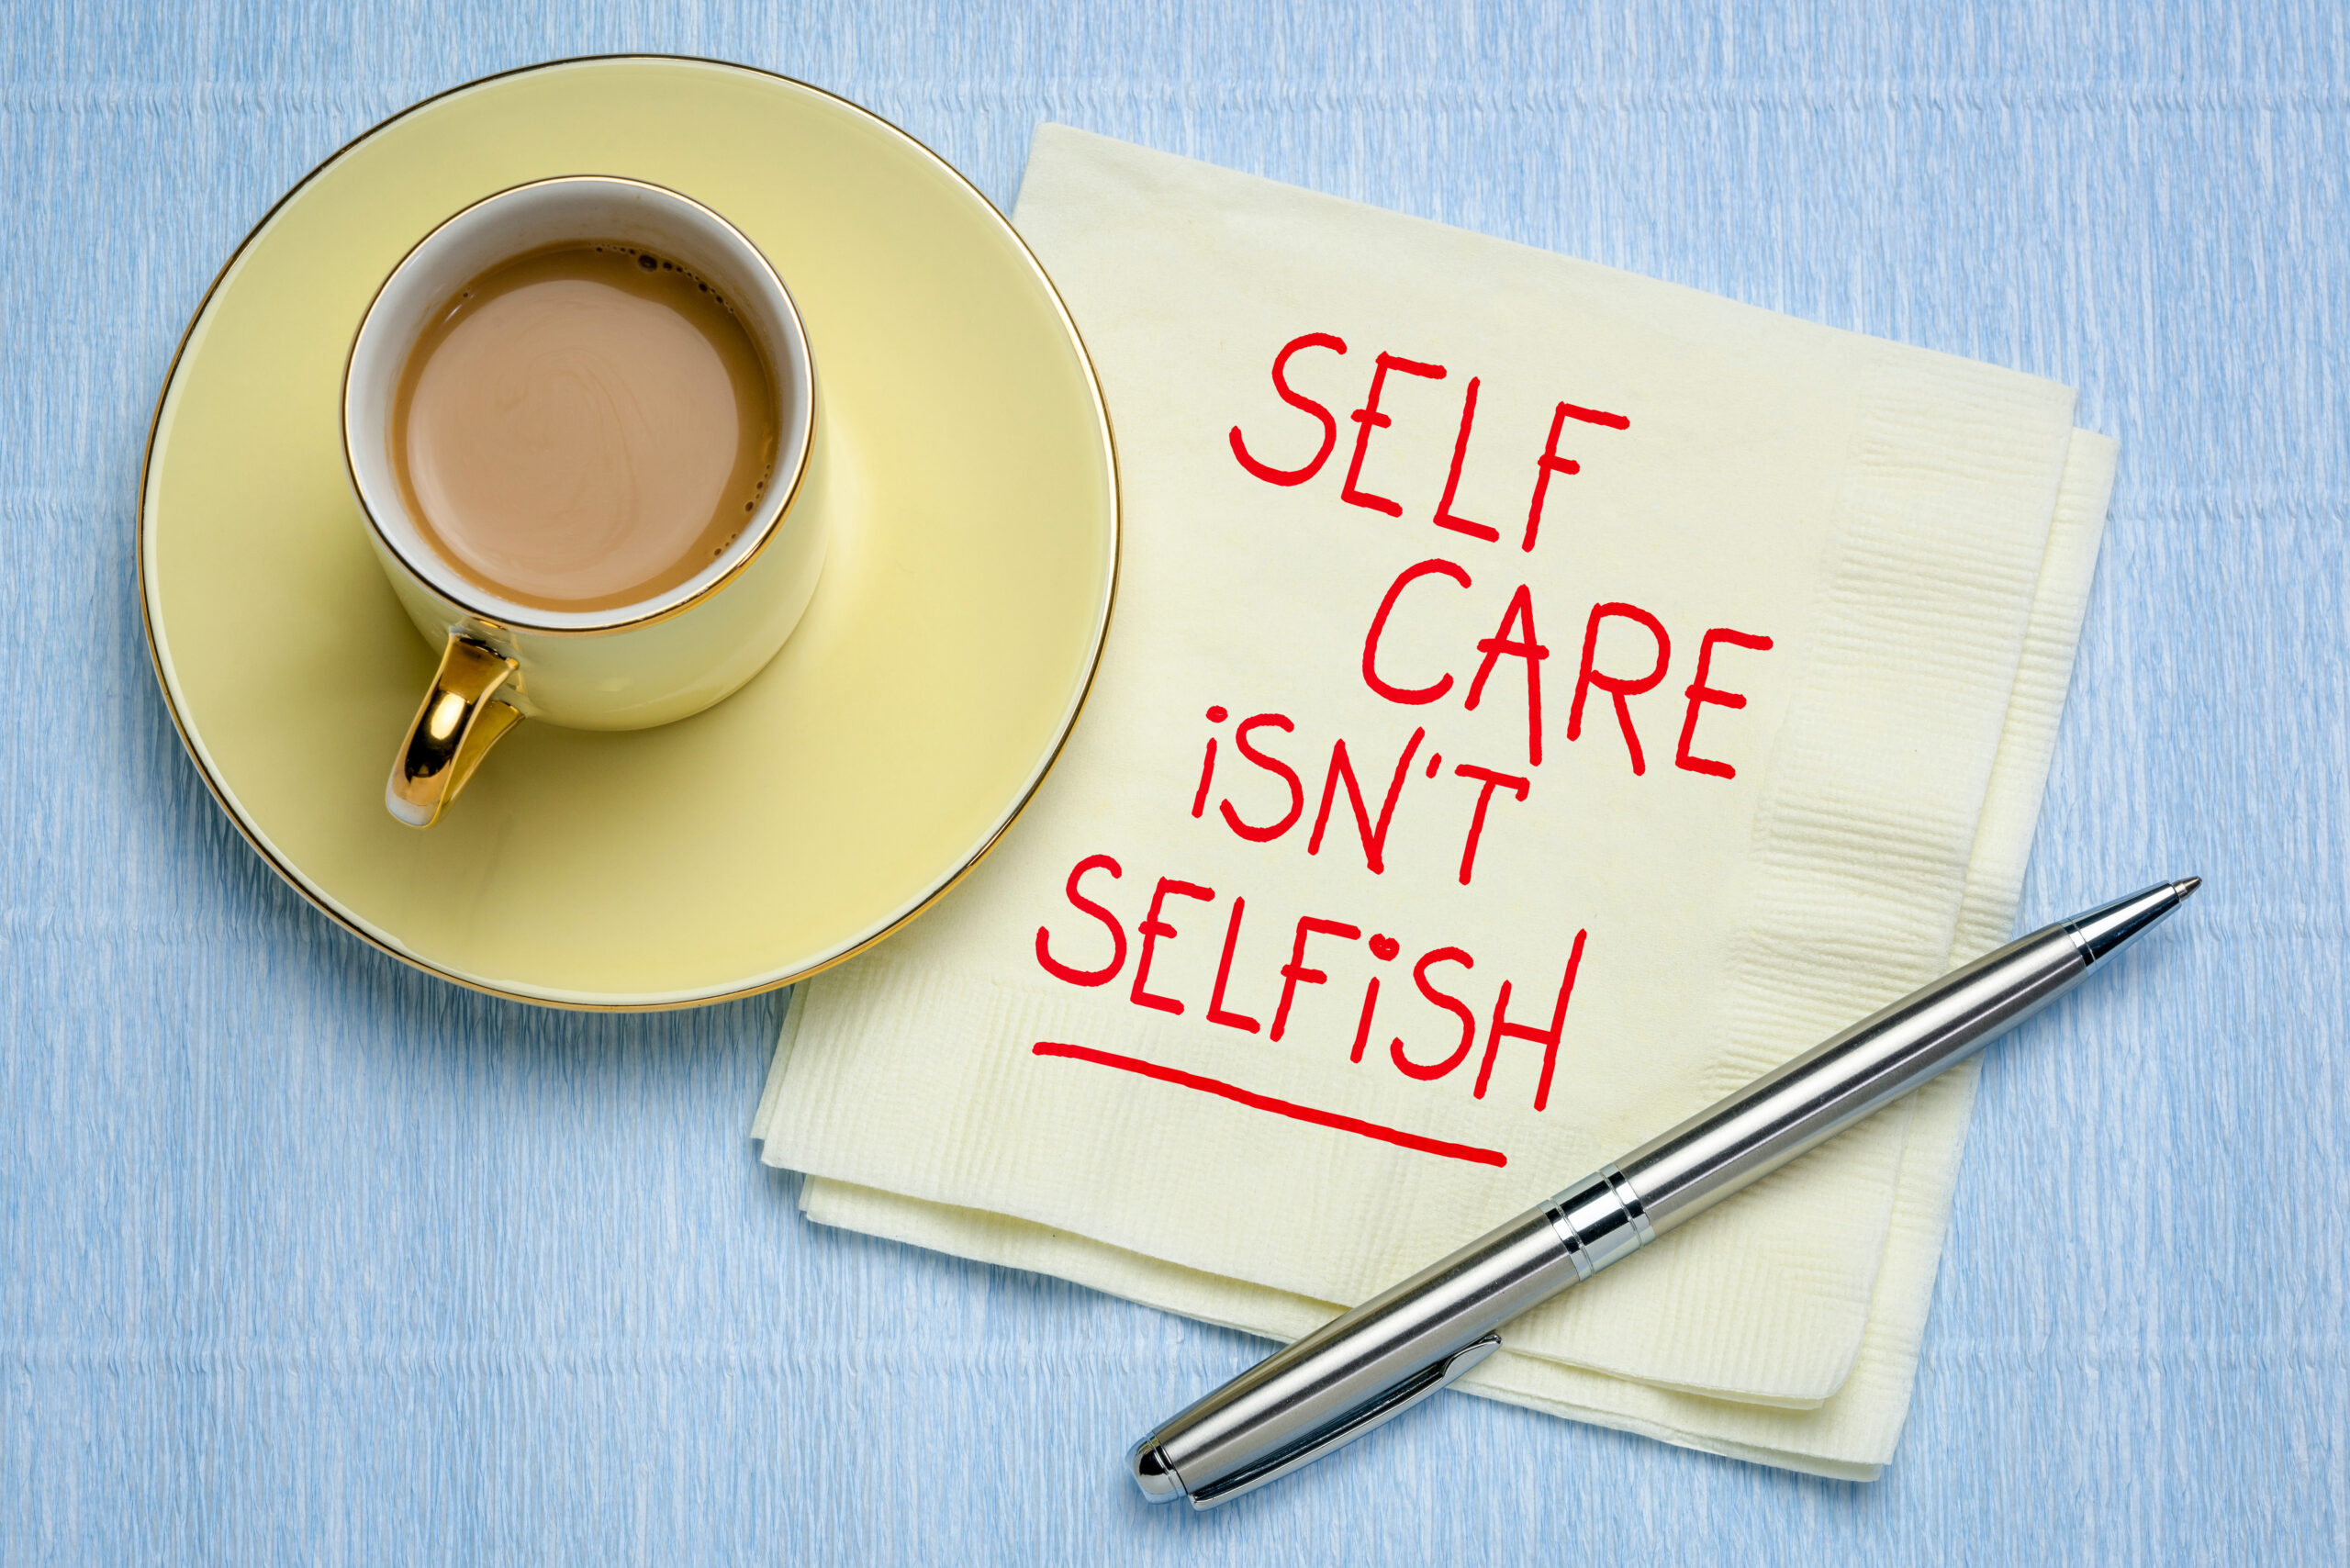 Red handwriting on a napkin that says, “Self care isn’t selfish,” with a cup of coffee on the side.